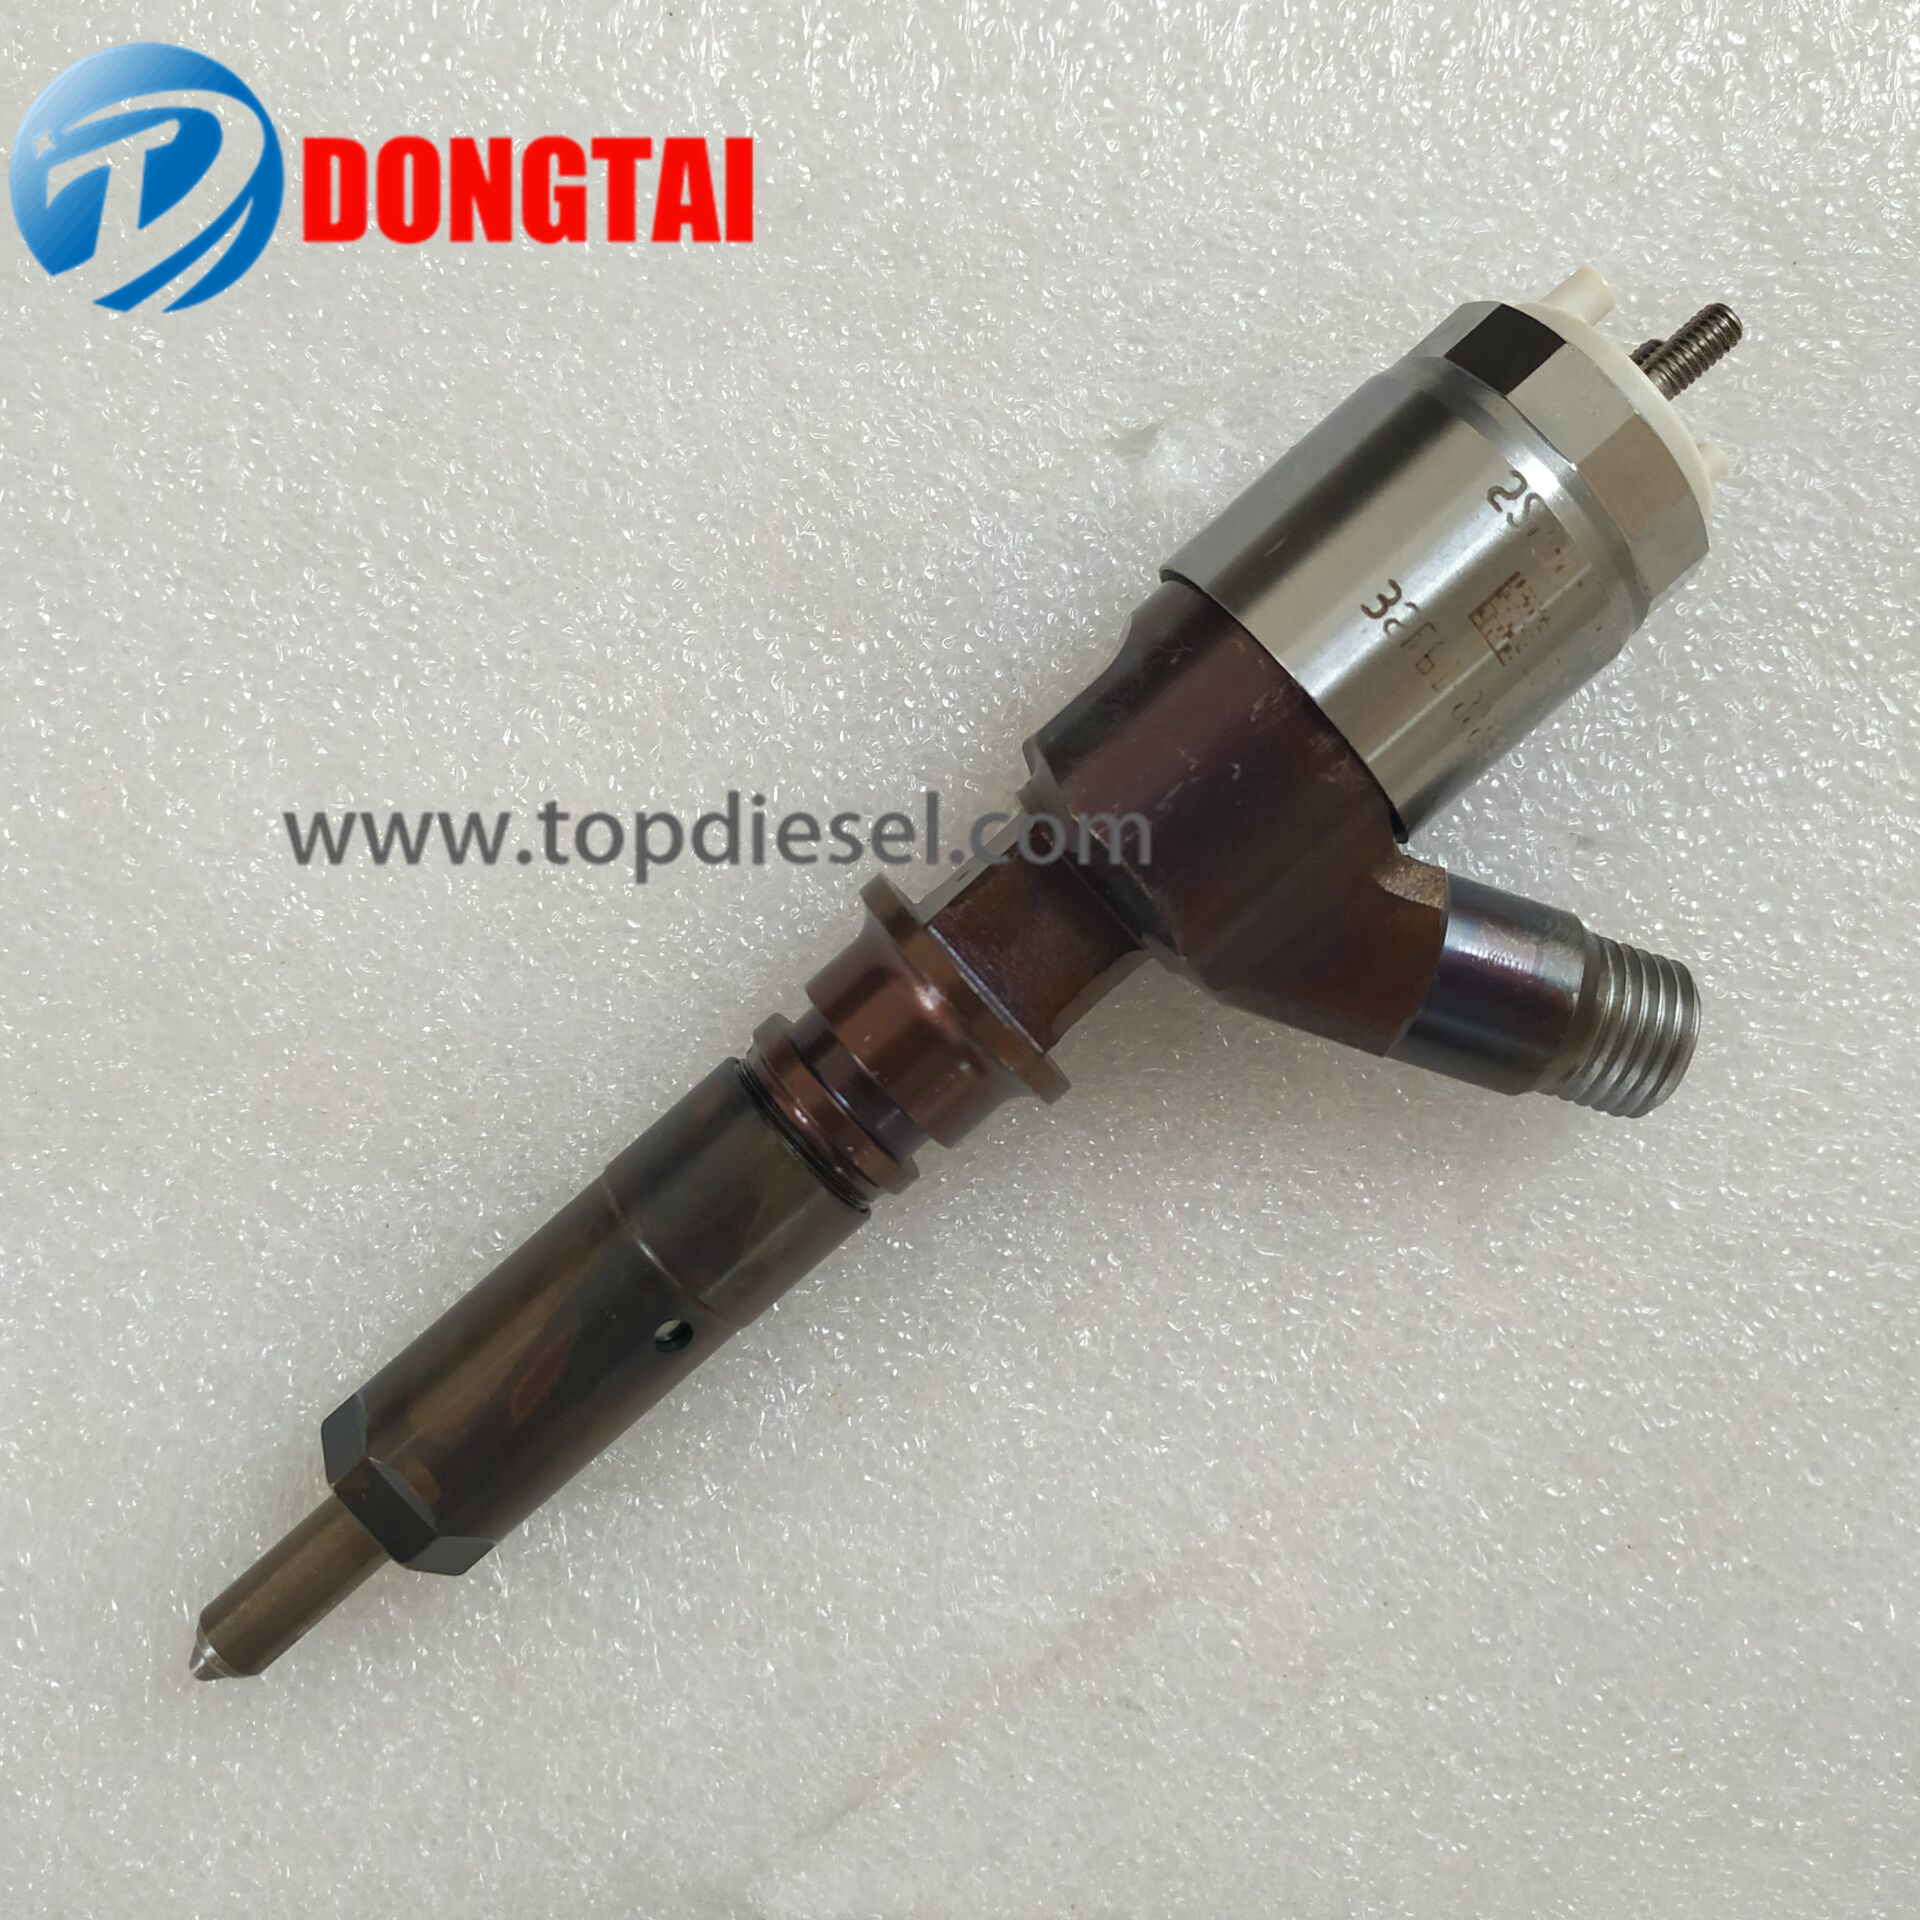 100% Original S80h Nozzle Tester - 356-1367 CAT Injector – Dongtai